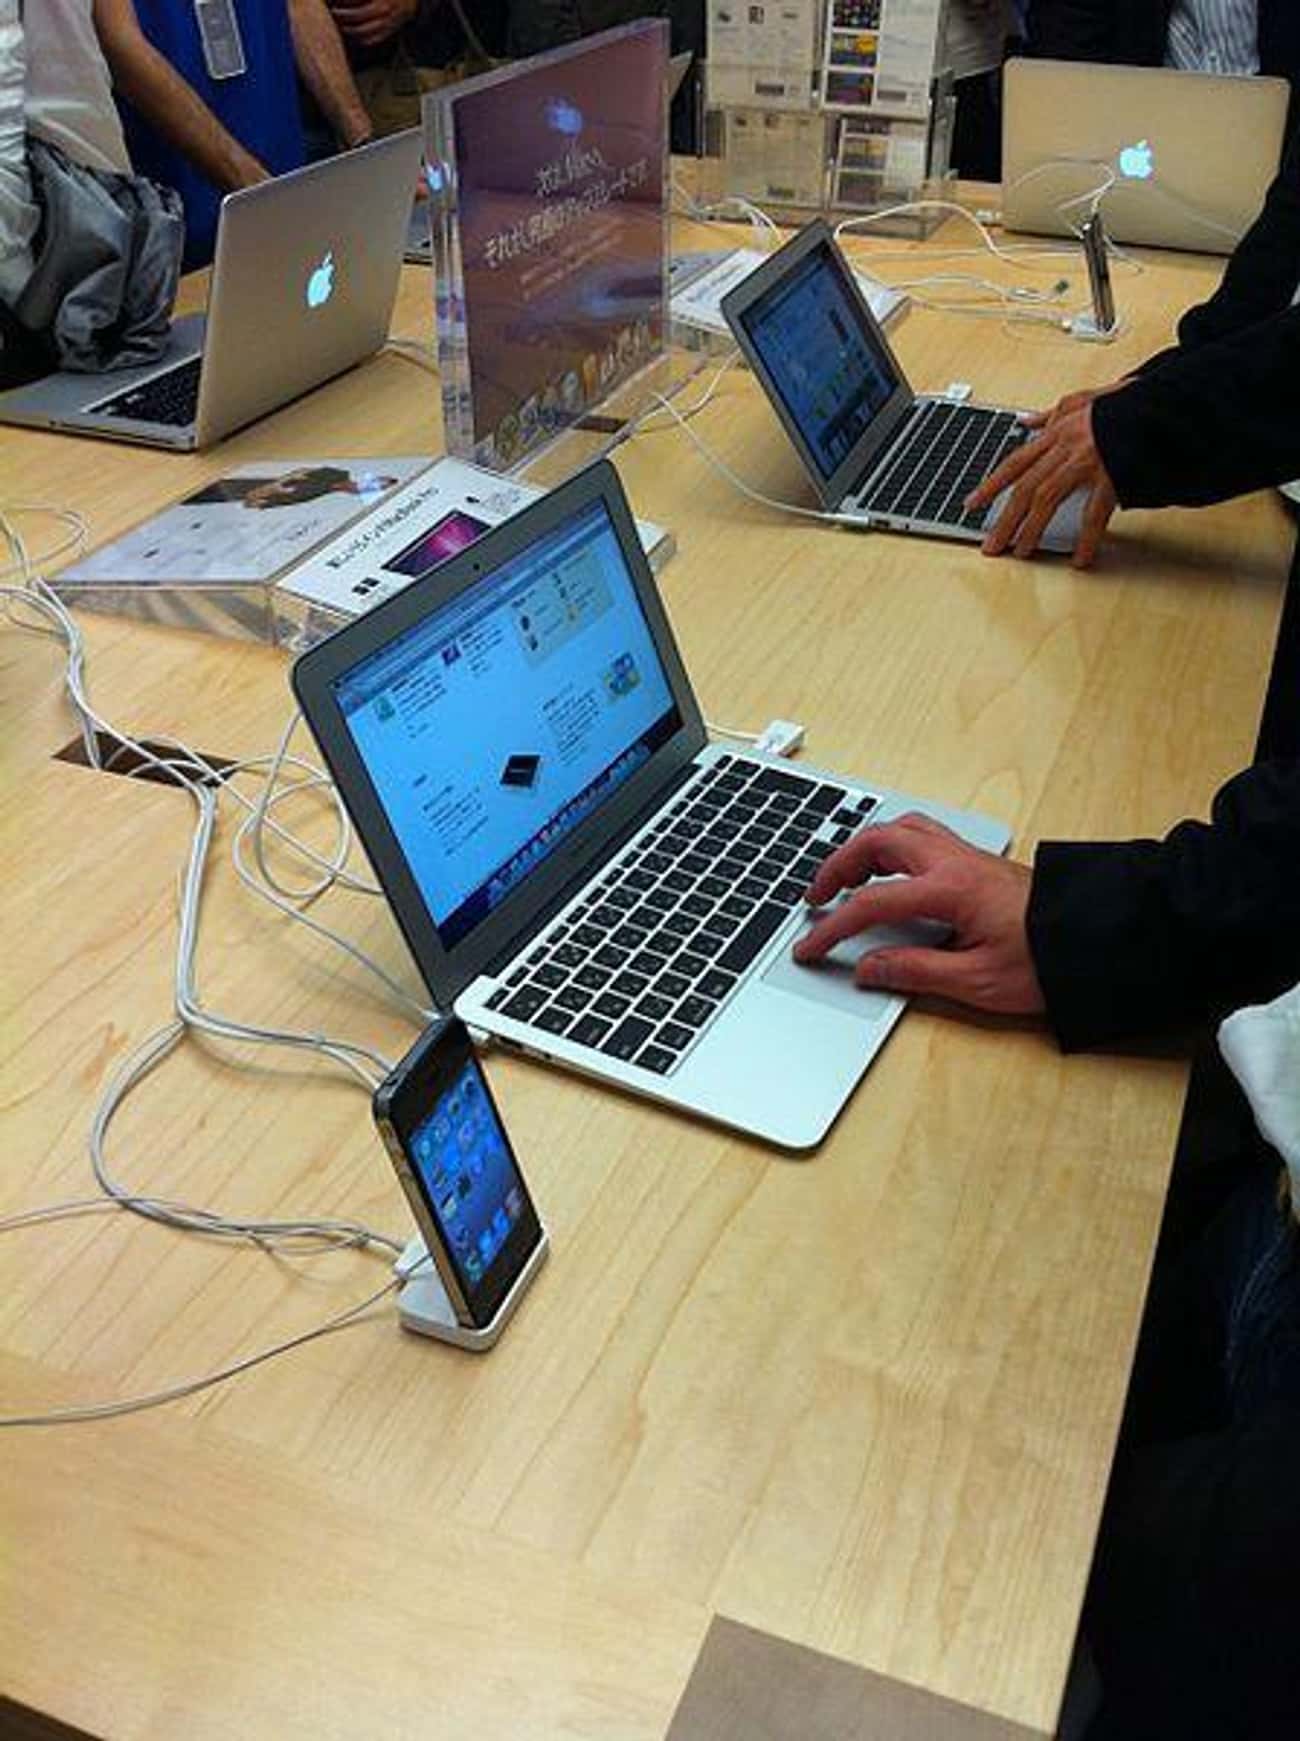 All MacBooks In Apple Stores Are Angled At 76 Degrees To Entice People To Touch Them